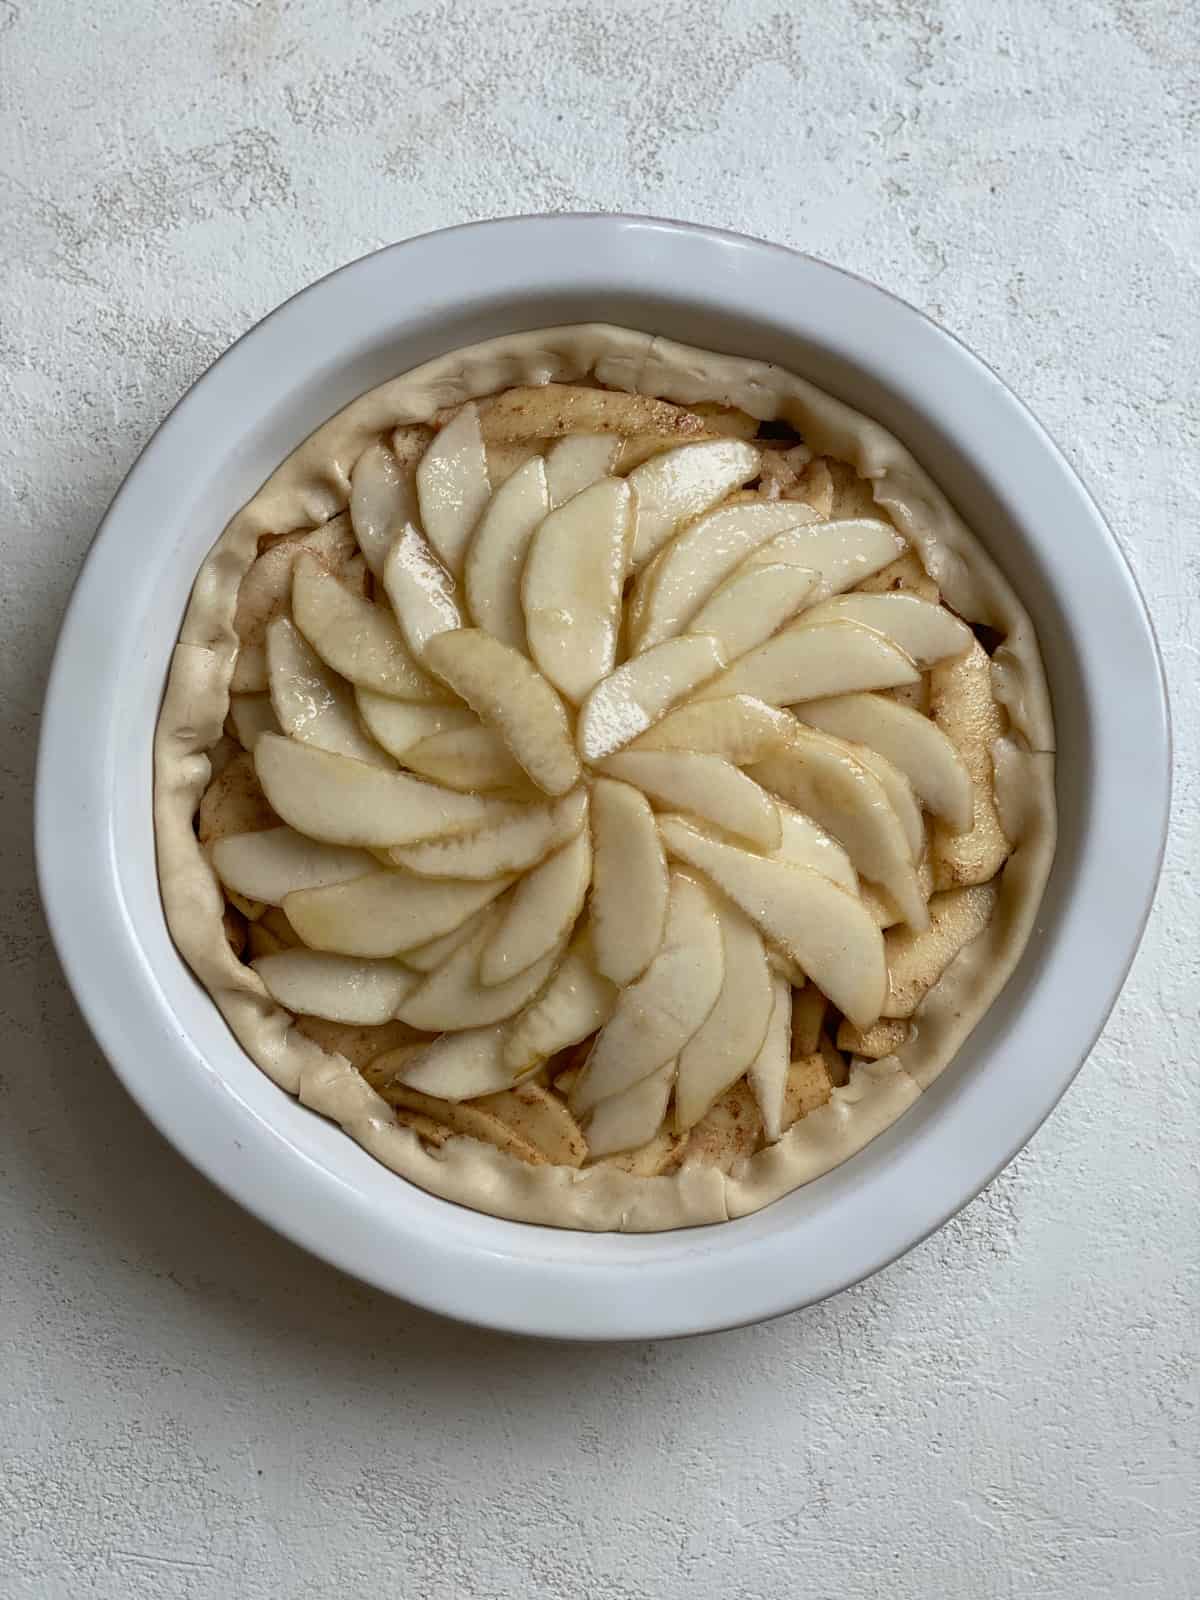 pre baked apple pear pie against a white surface